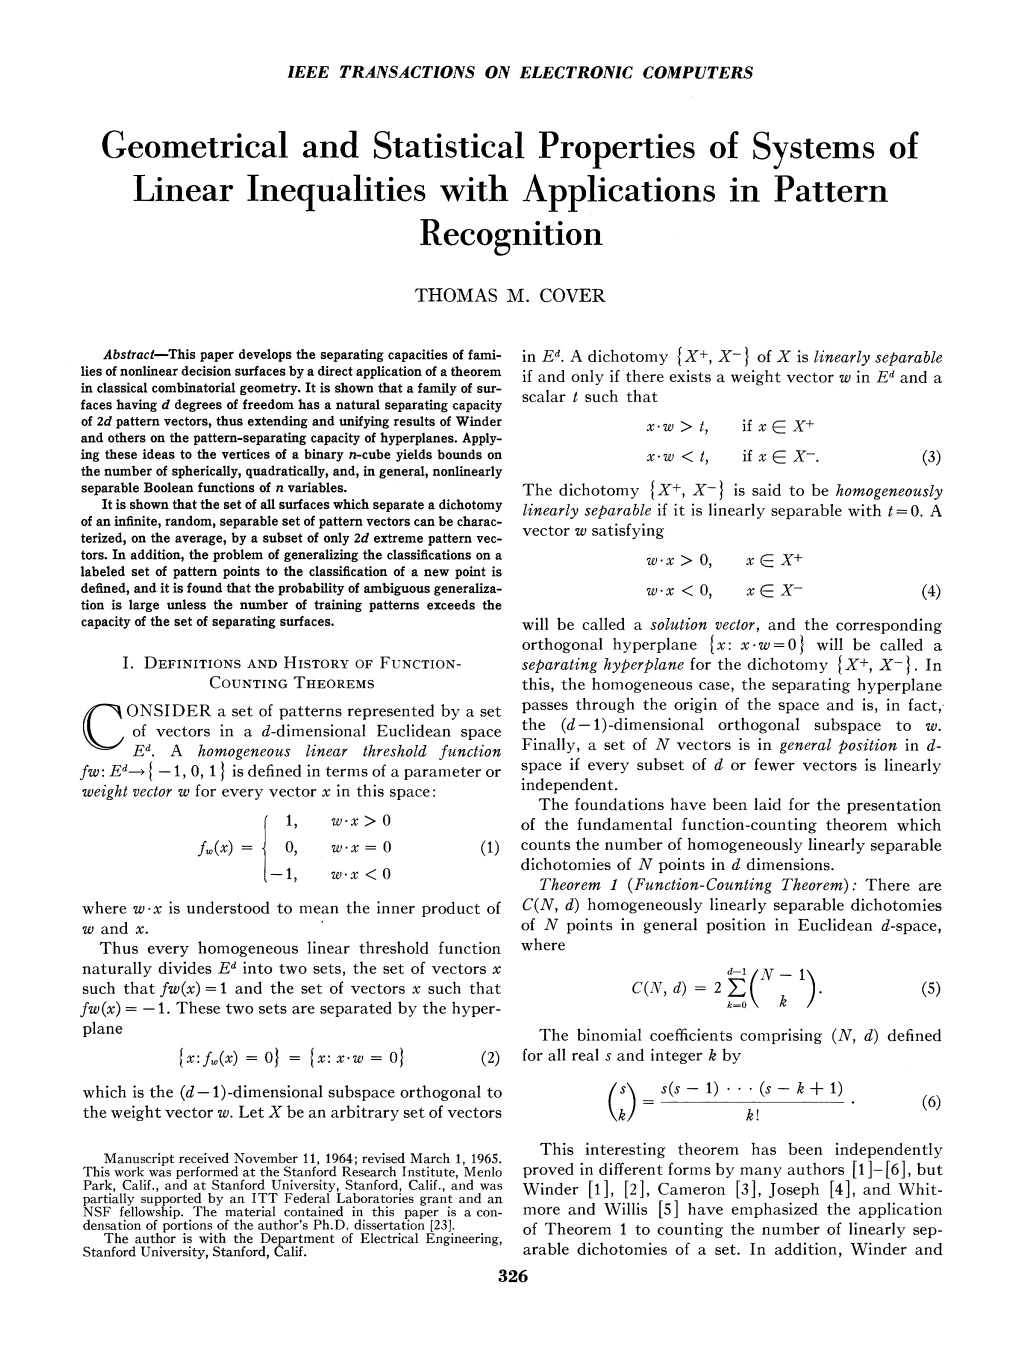 Geometrical and Statistical Properties of Systems of Linear Inequalities with Applications in Pattern Recognition